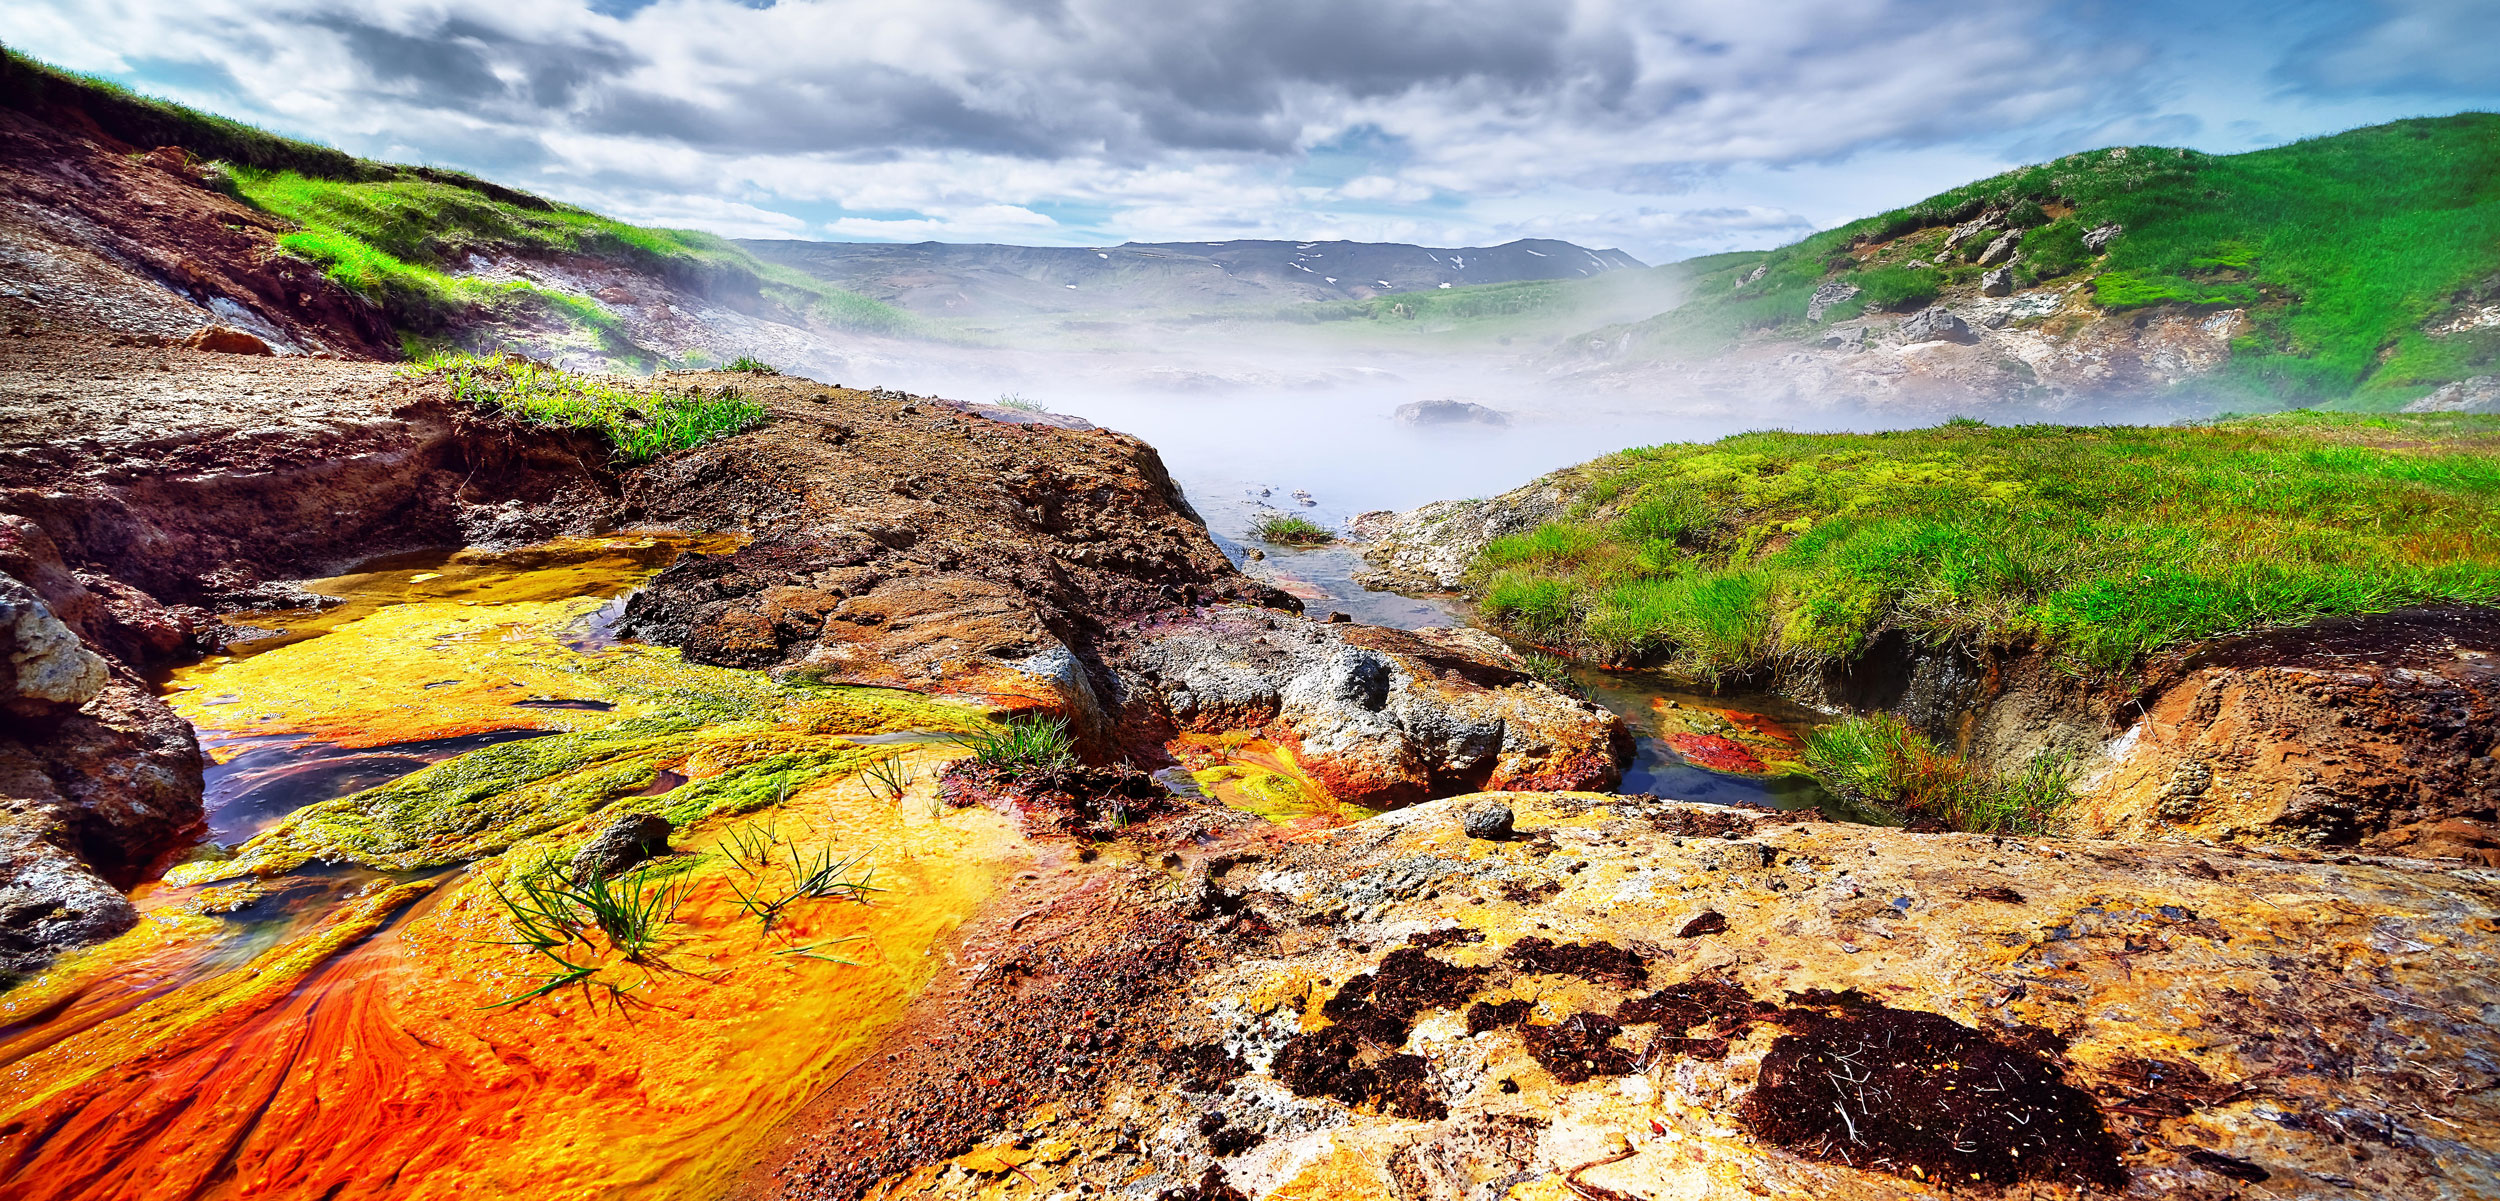 Geothermal area with very colorful deposits in Hengill, Iceland